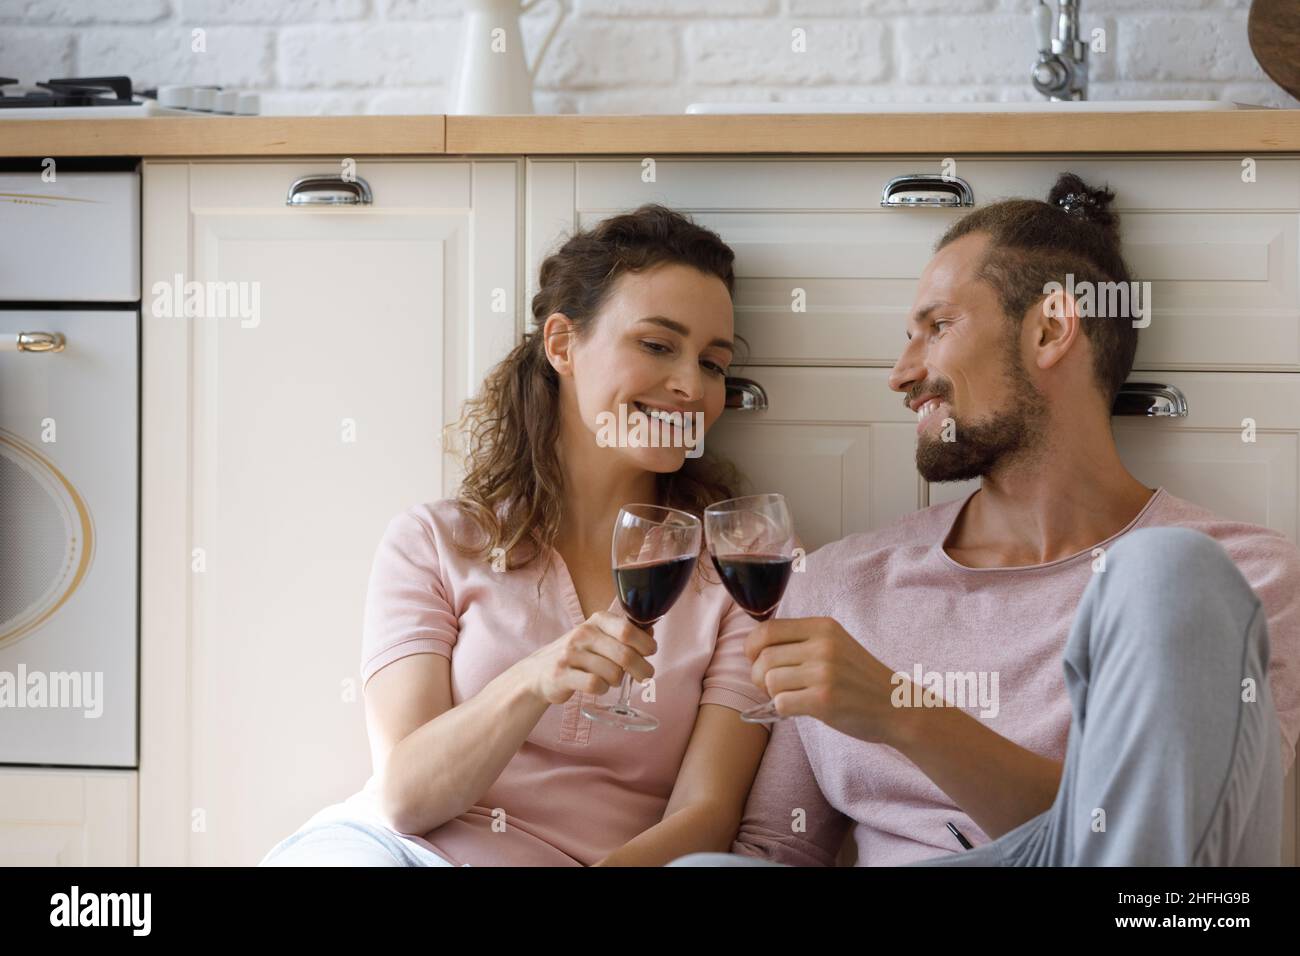 Happy affectionate young couple clinking glasses with wine. Stock Photo